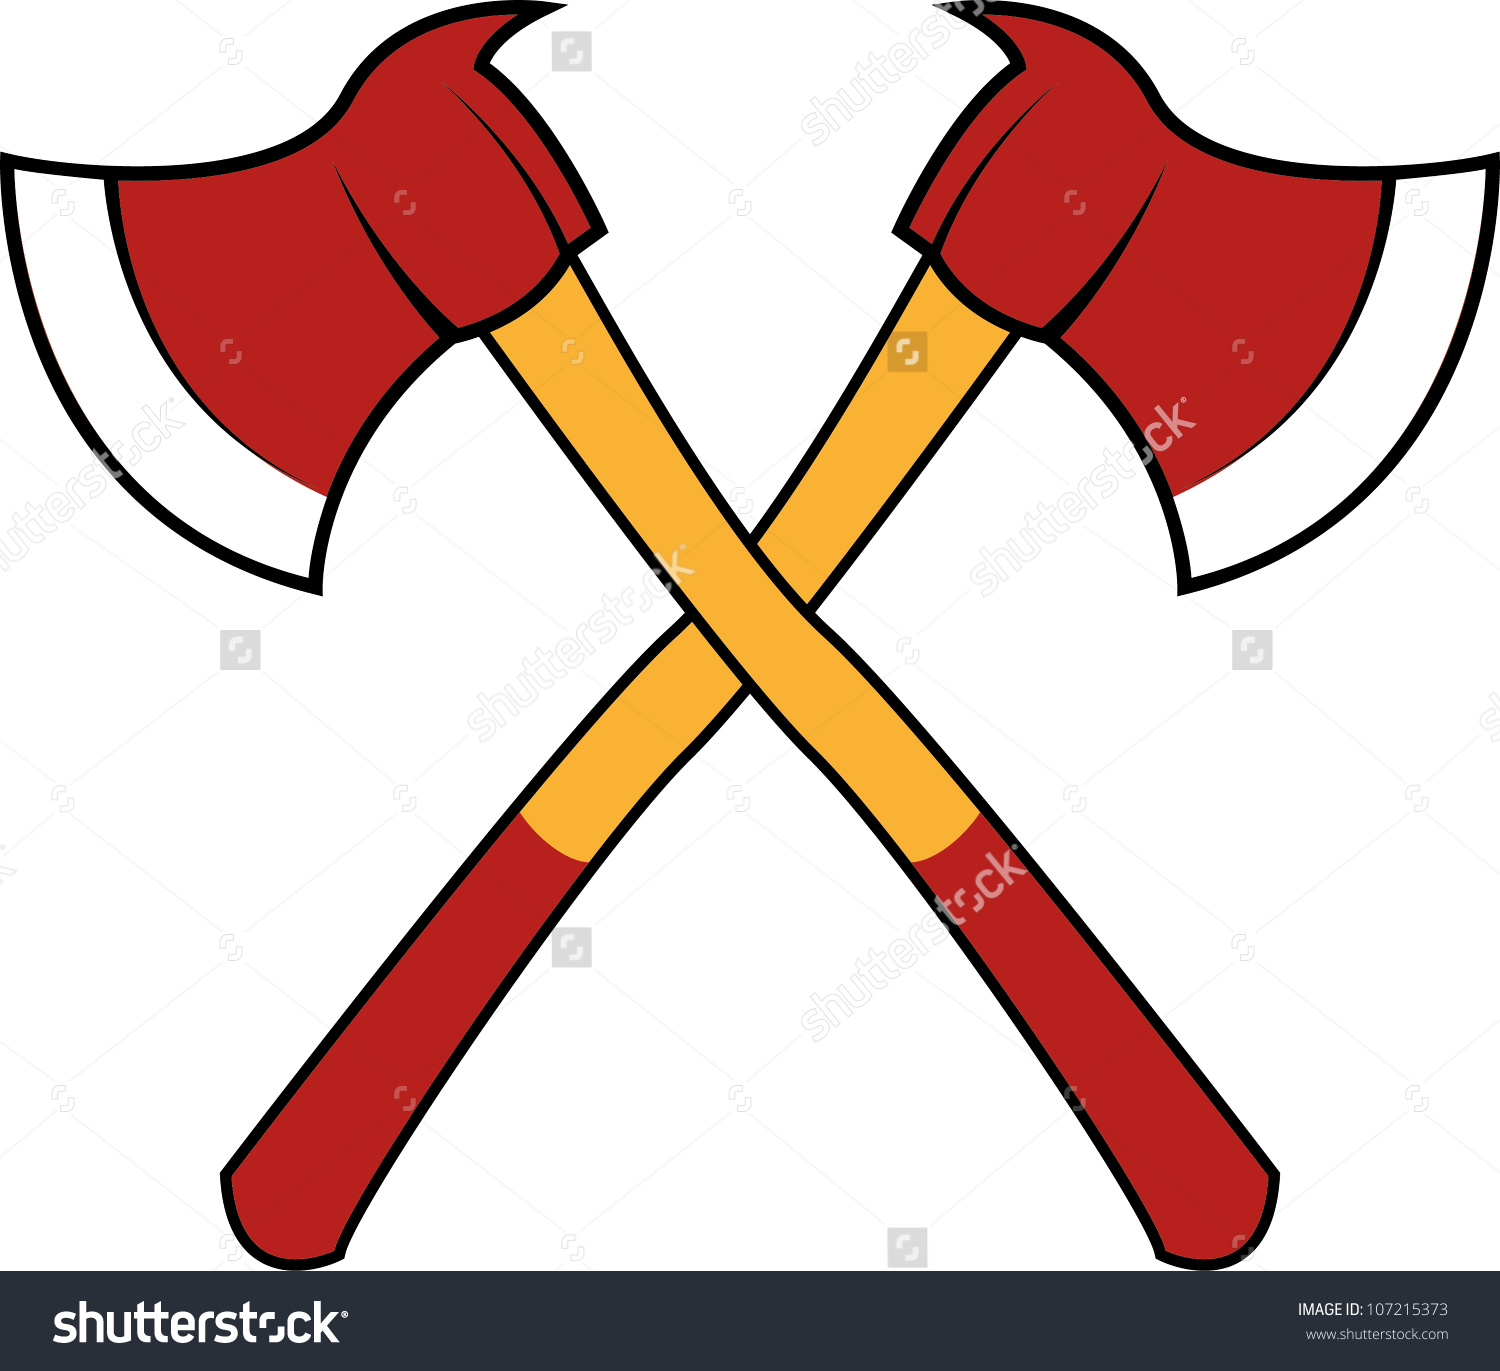 Firefighter axe pencil and. Ax clipart crossed fire